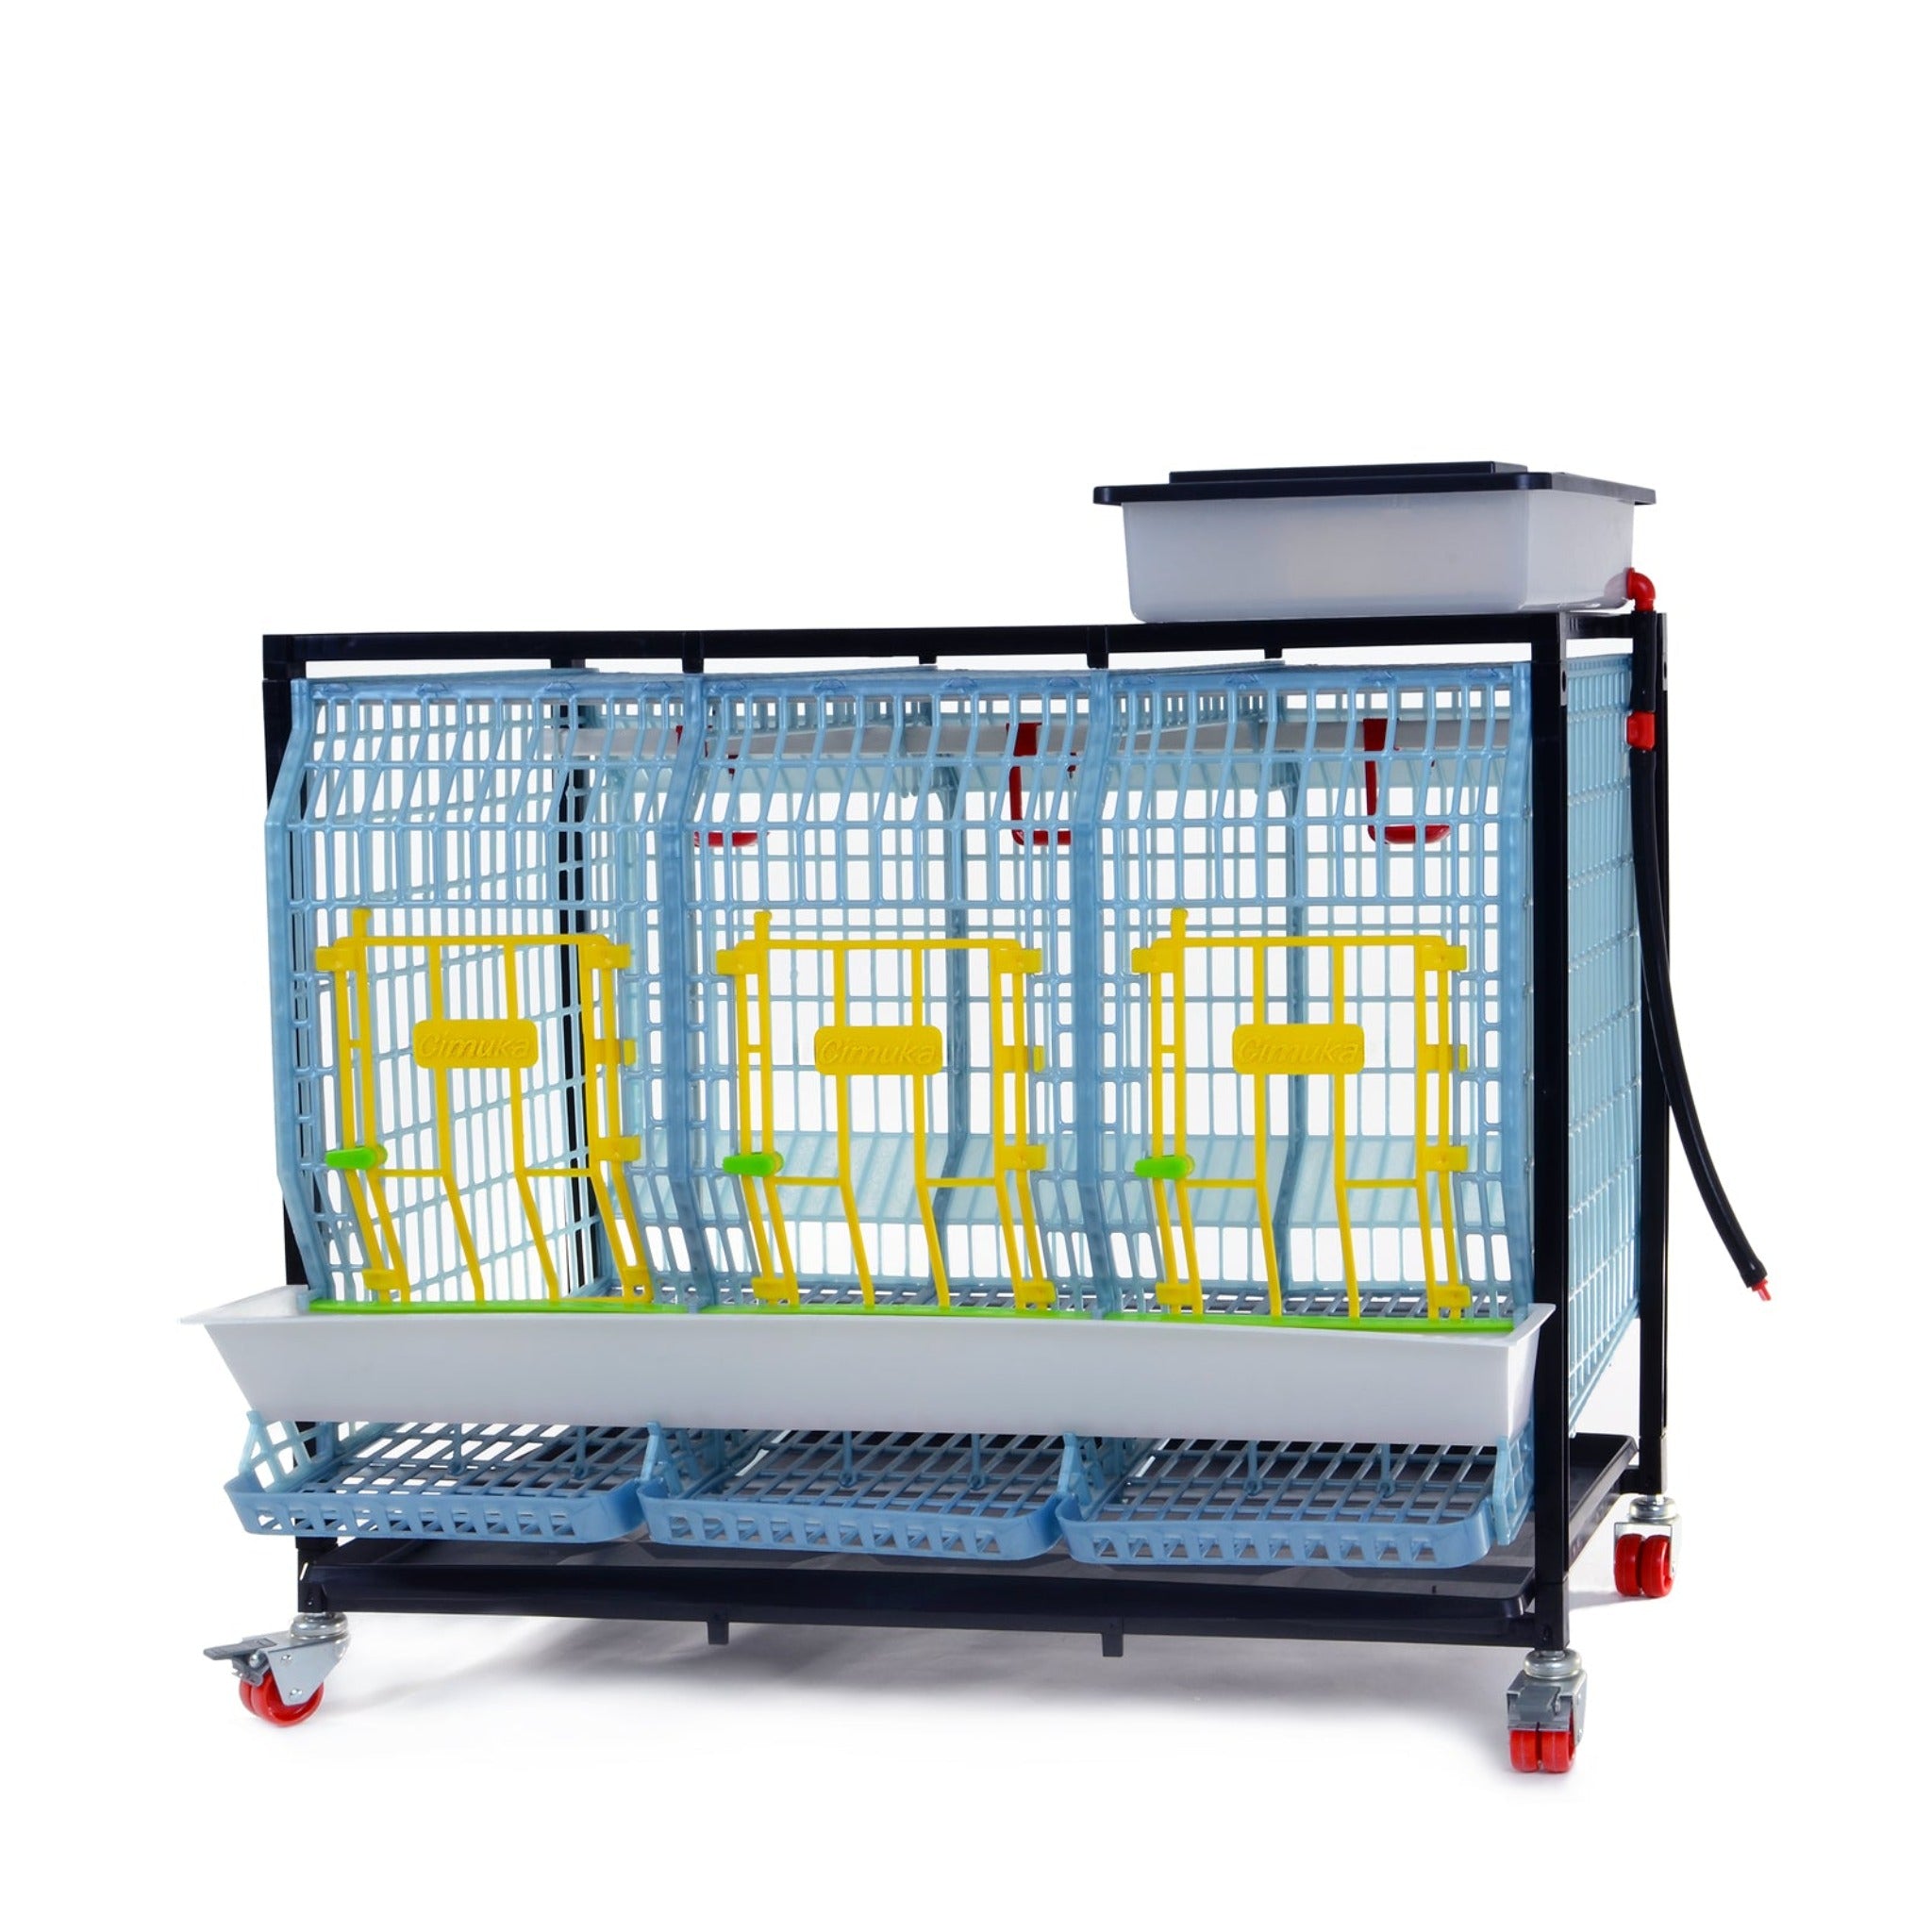 Hatching Time Cimuka. TYK60 22” Chicken cage 1 layer. Image shows chicken cage front. Roll out egg trays can be seen on front under feeding trough. Water reservoir tank is on top of cage with hose going down for automatic drinker system.